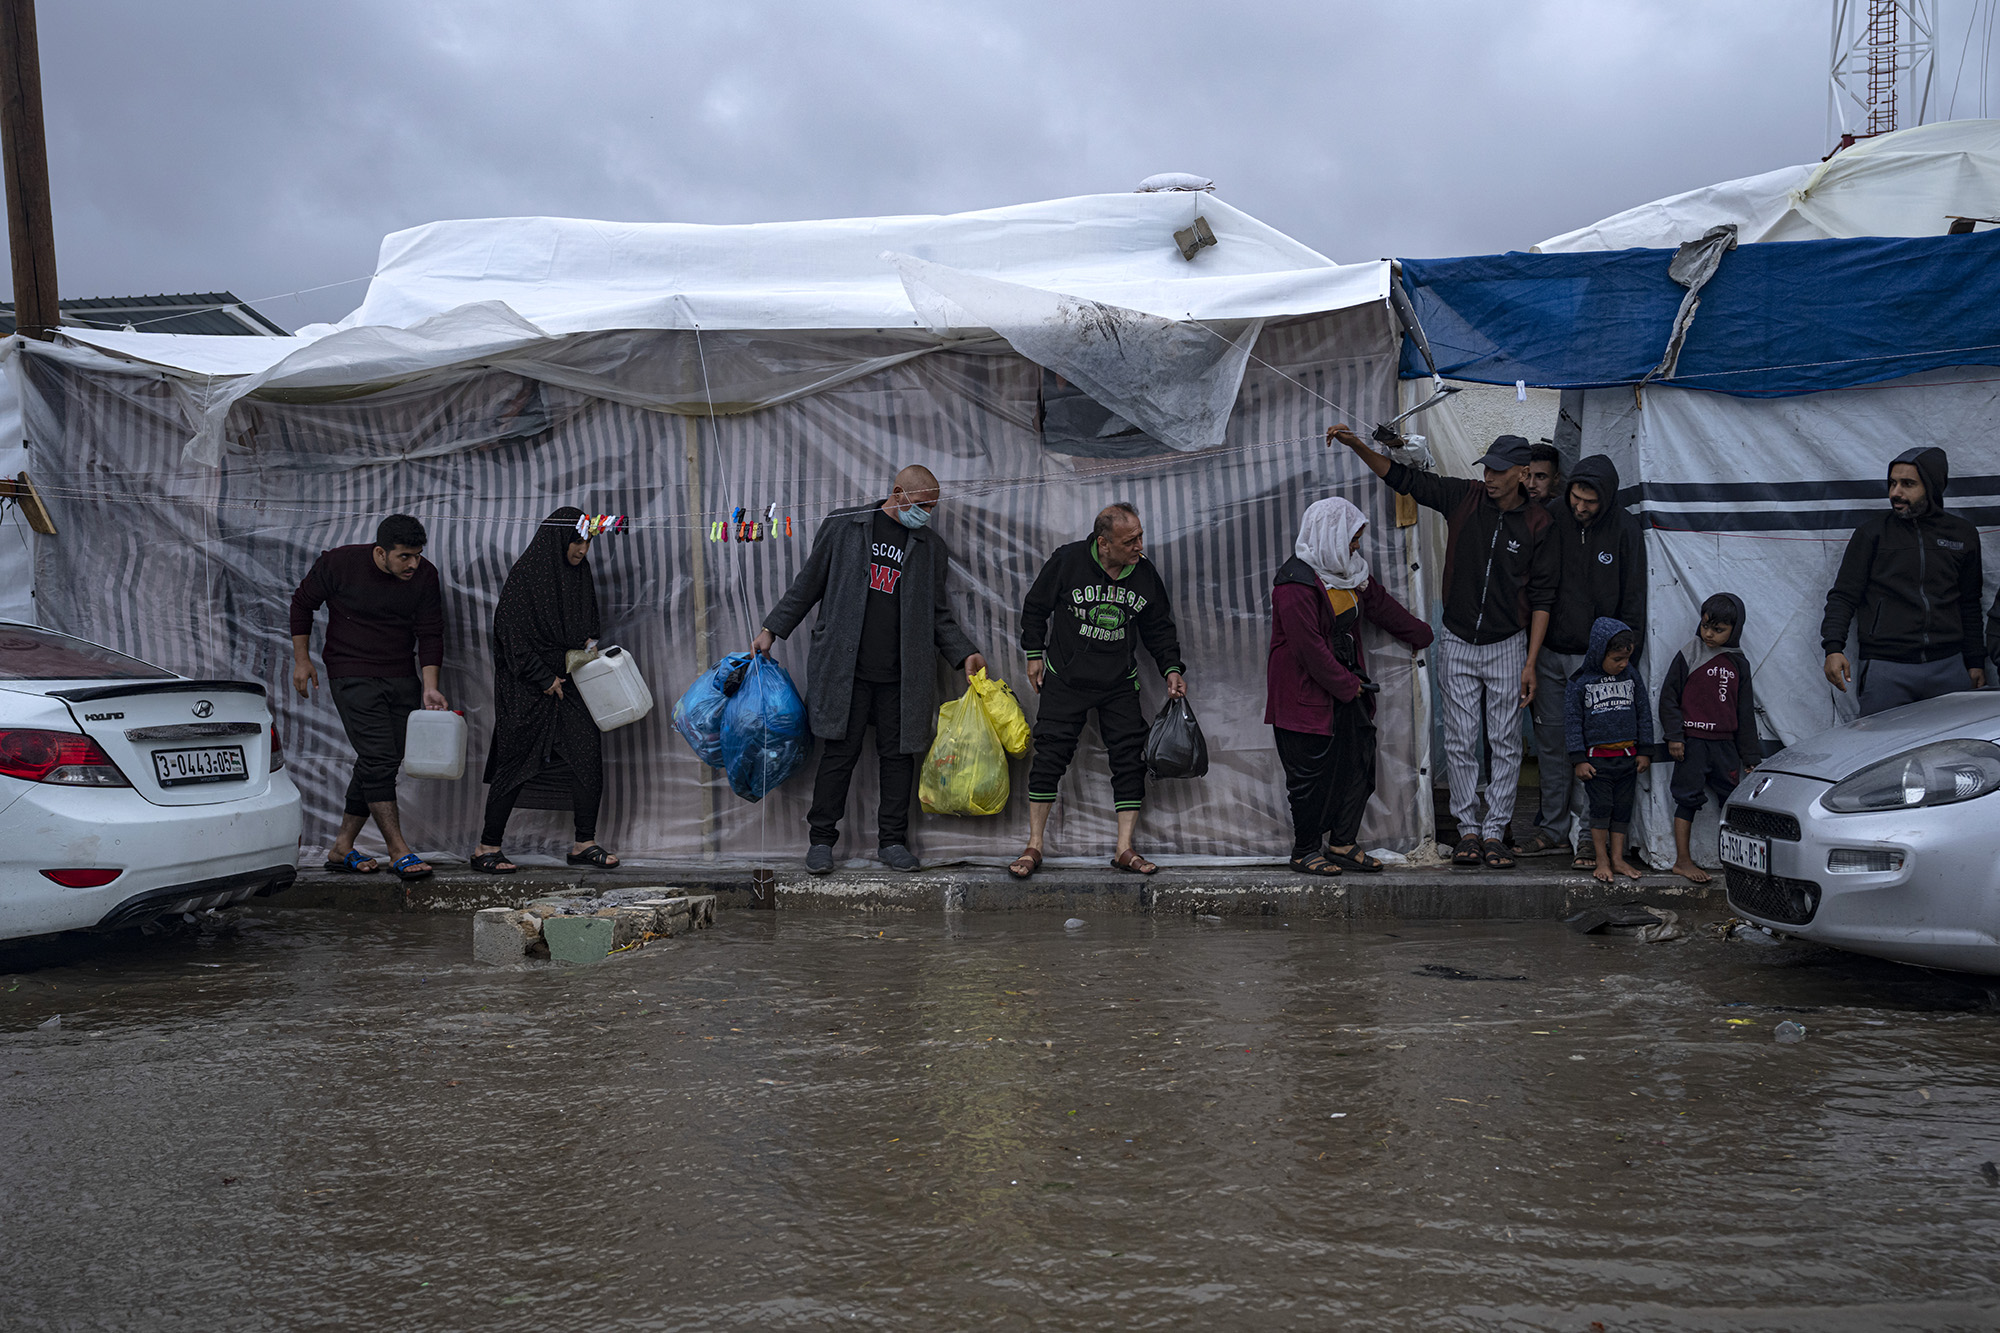 Palestinians seek cover from a rainfall at a UN tent camp in the southern town of Khan Younis, Gaza, on November 19.